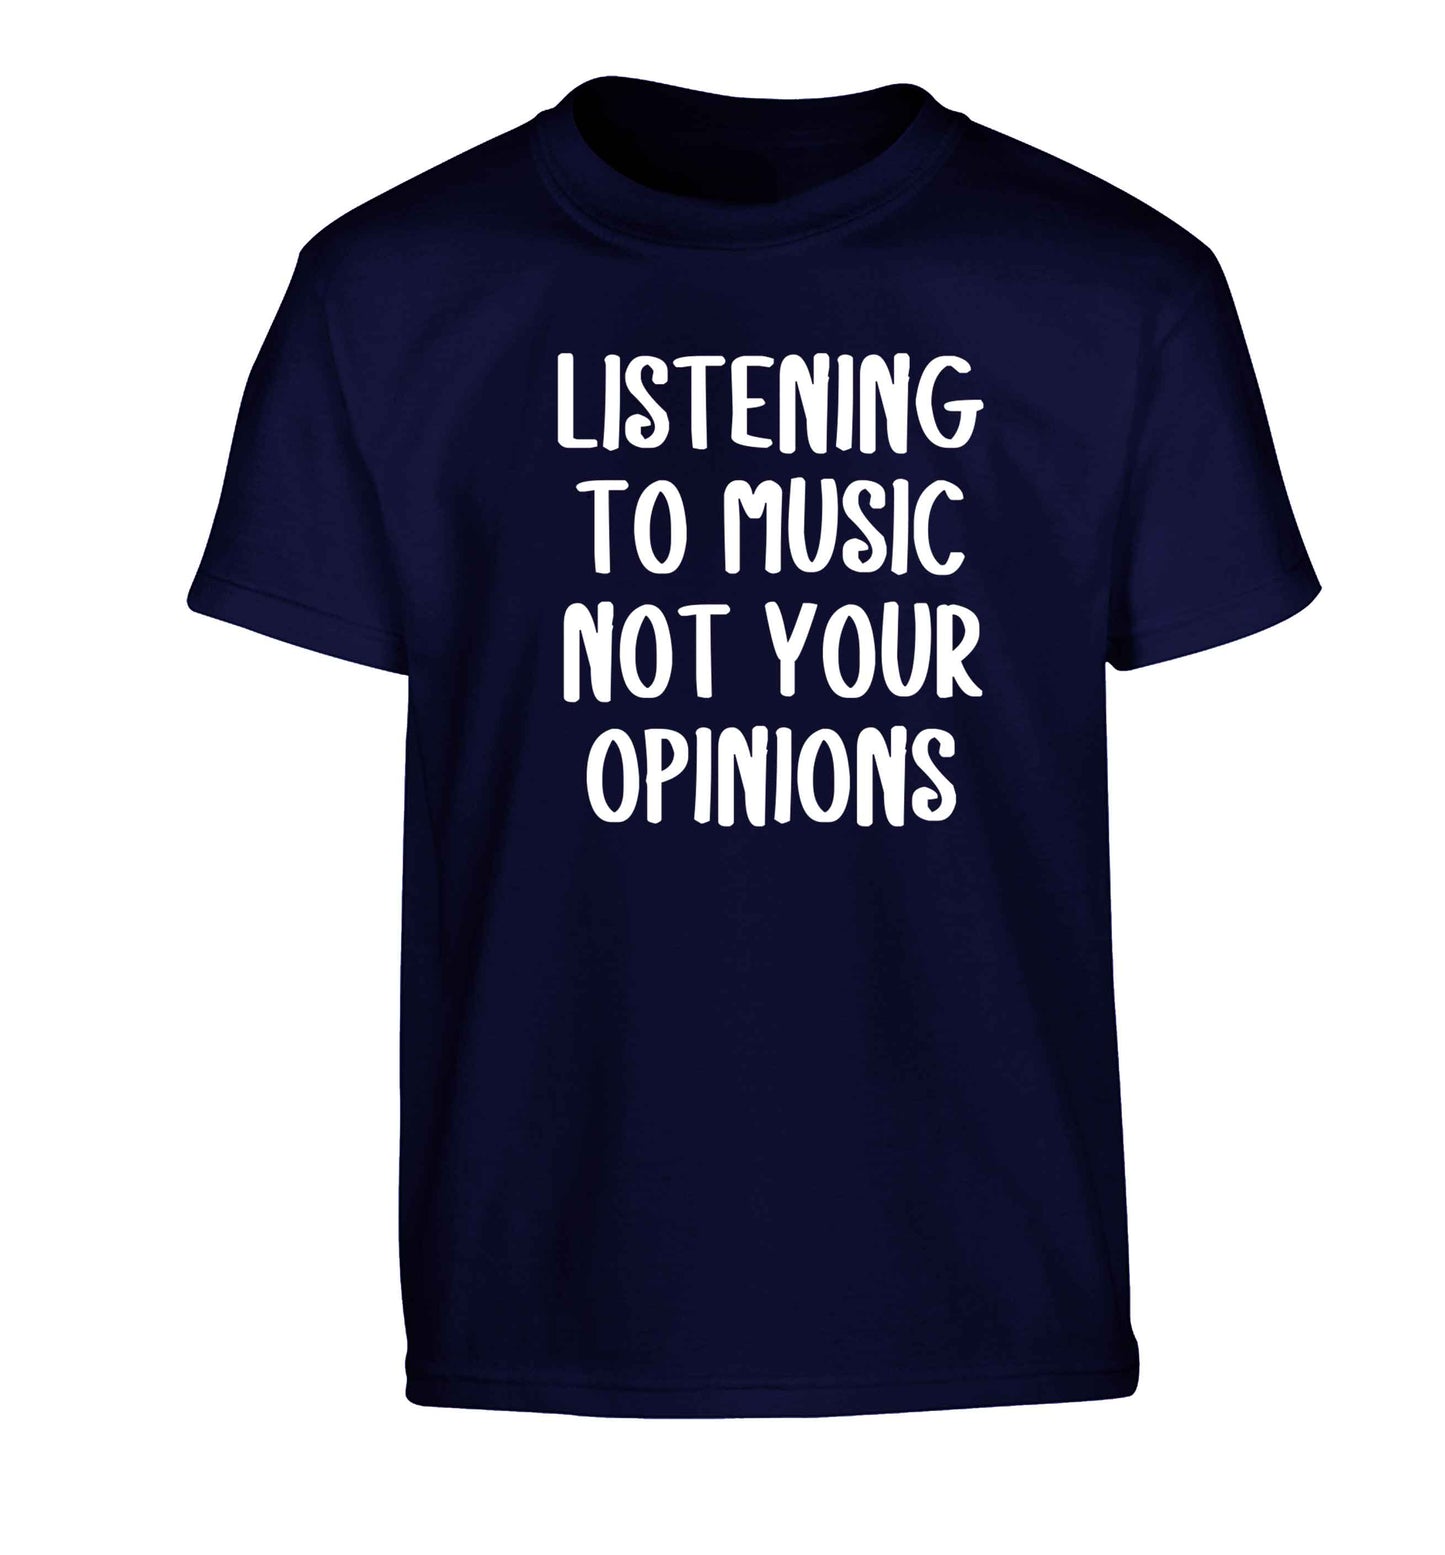 Listening to music not your opinions Children's navy Tshirt 12-13 Years